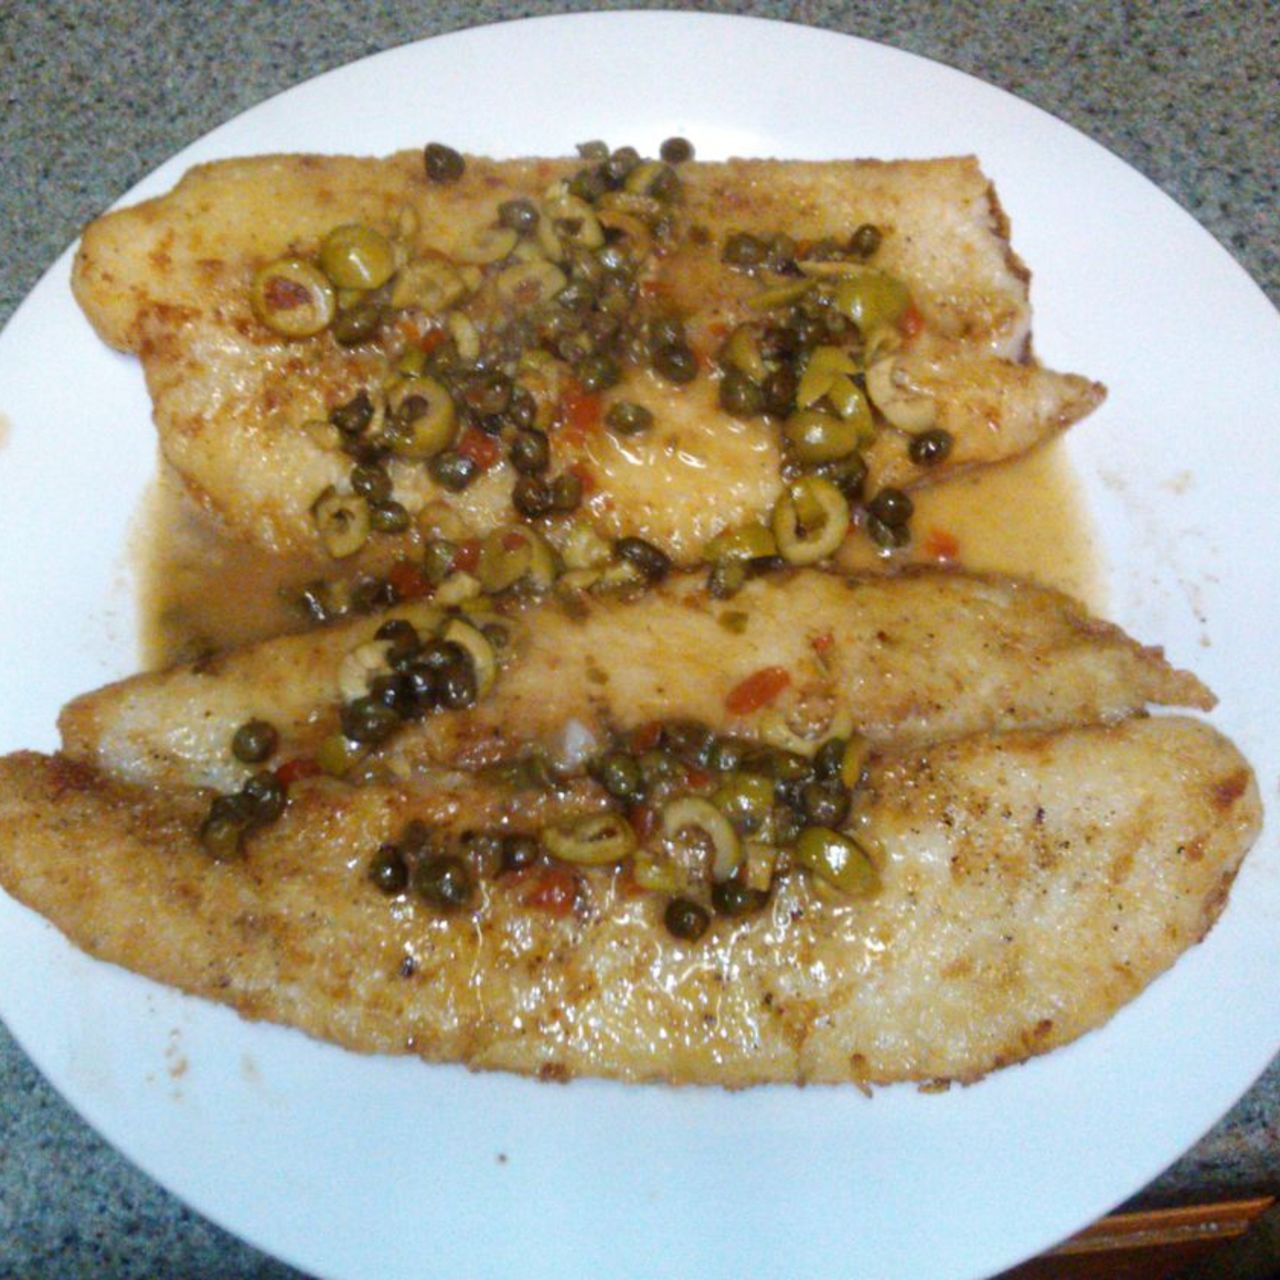 https://bigoven-res.cloudinary.com/image/upload/t_recipe-1280/pan-fried-fish-with-lemon-and-caper.jpg